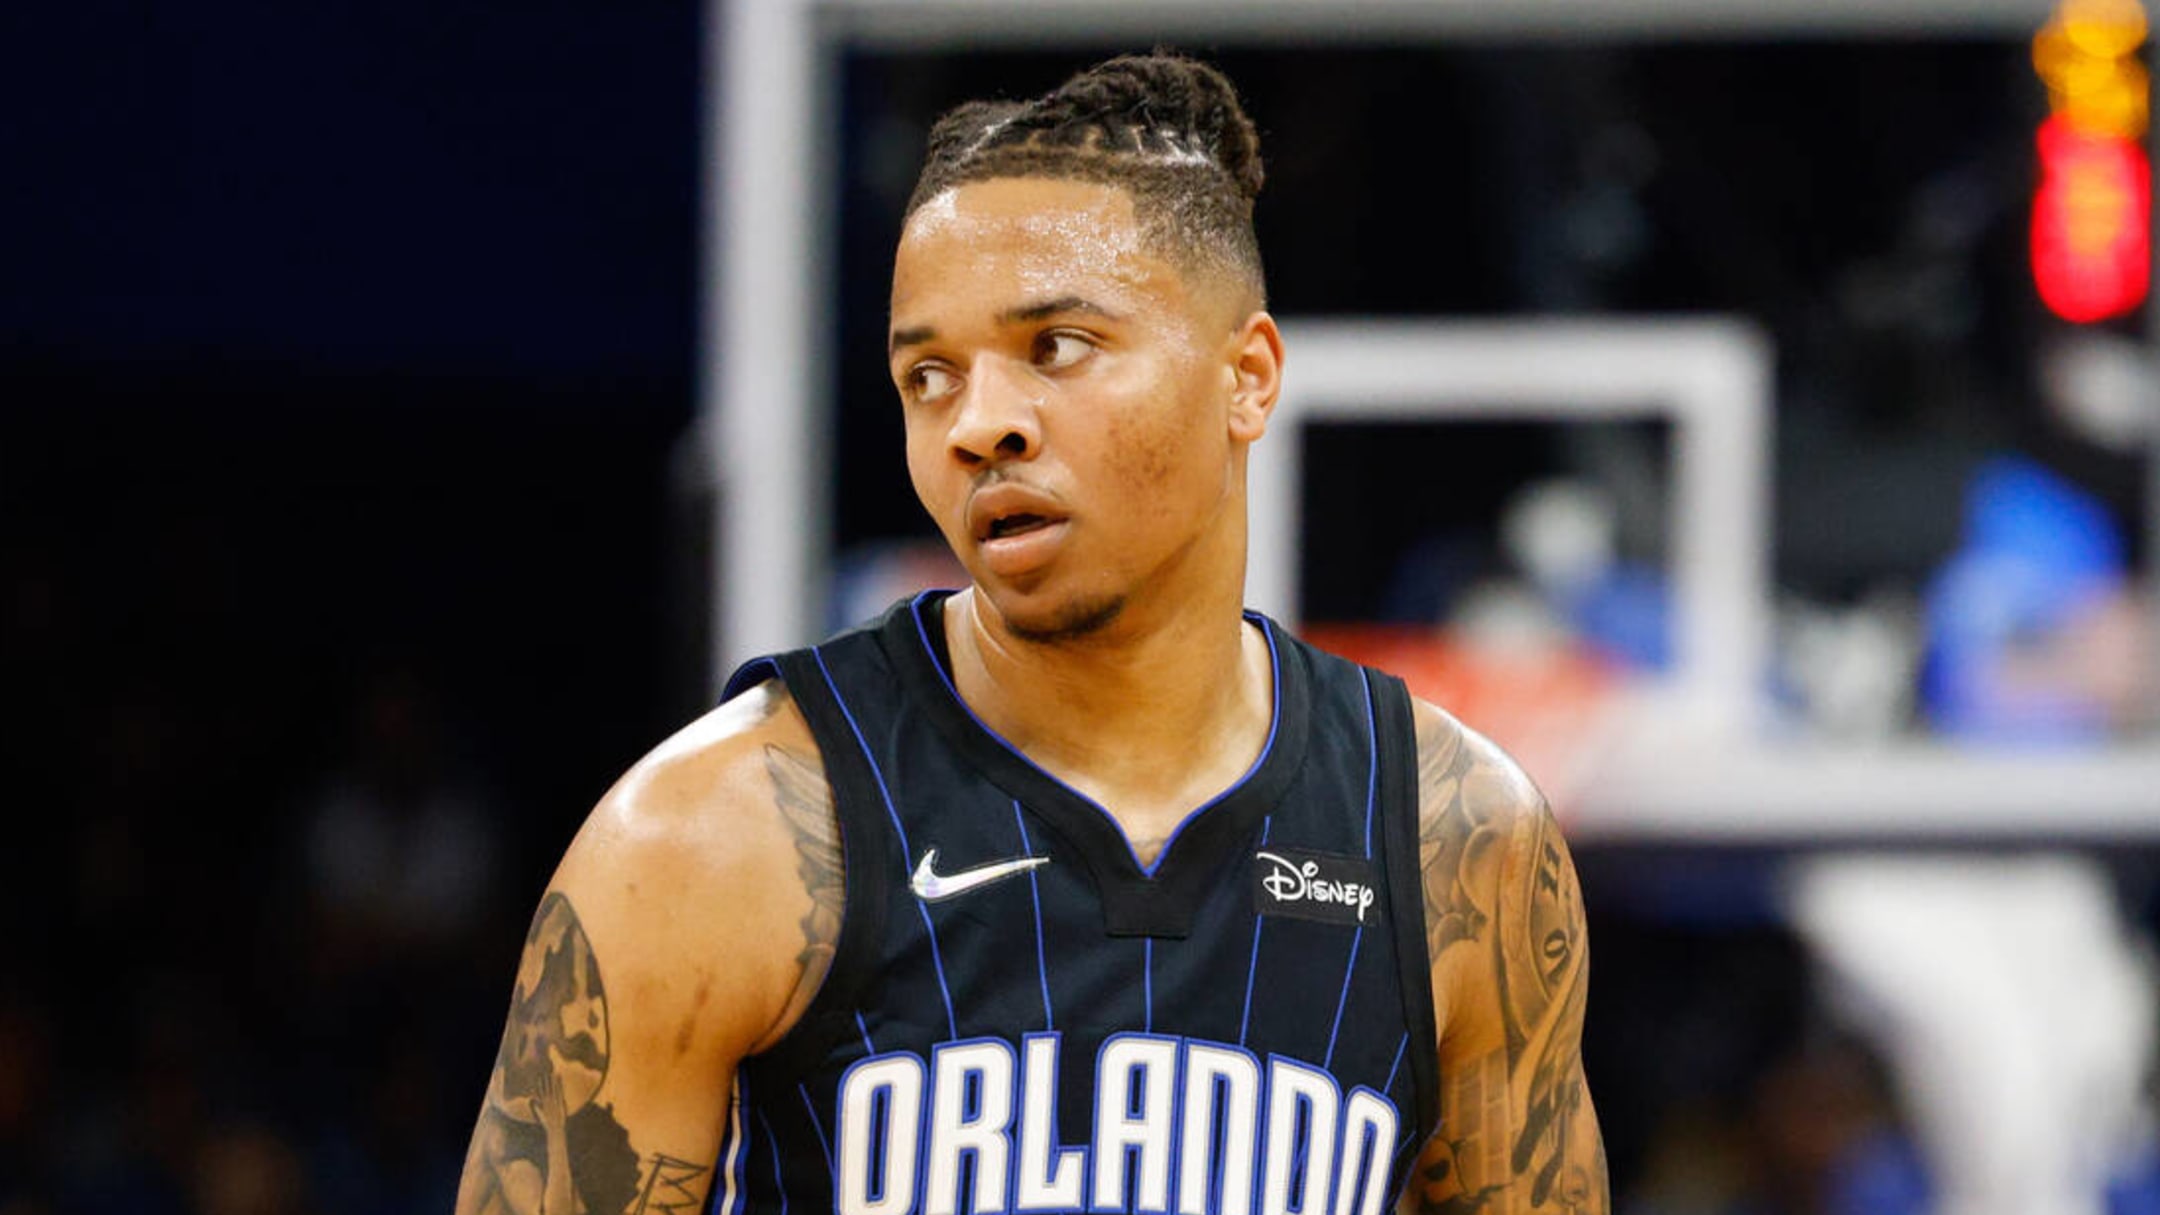 Orlando Magic cannot wait for the perfect time to bring Markelle Fultz back